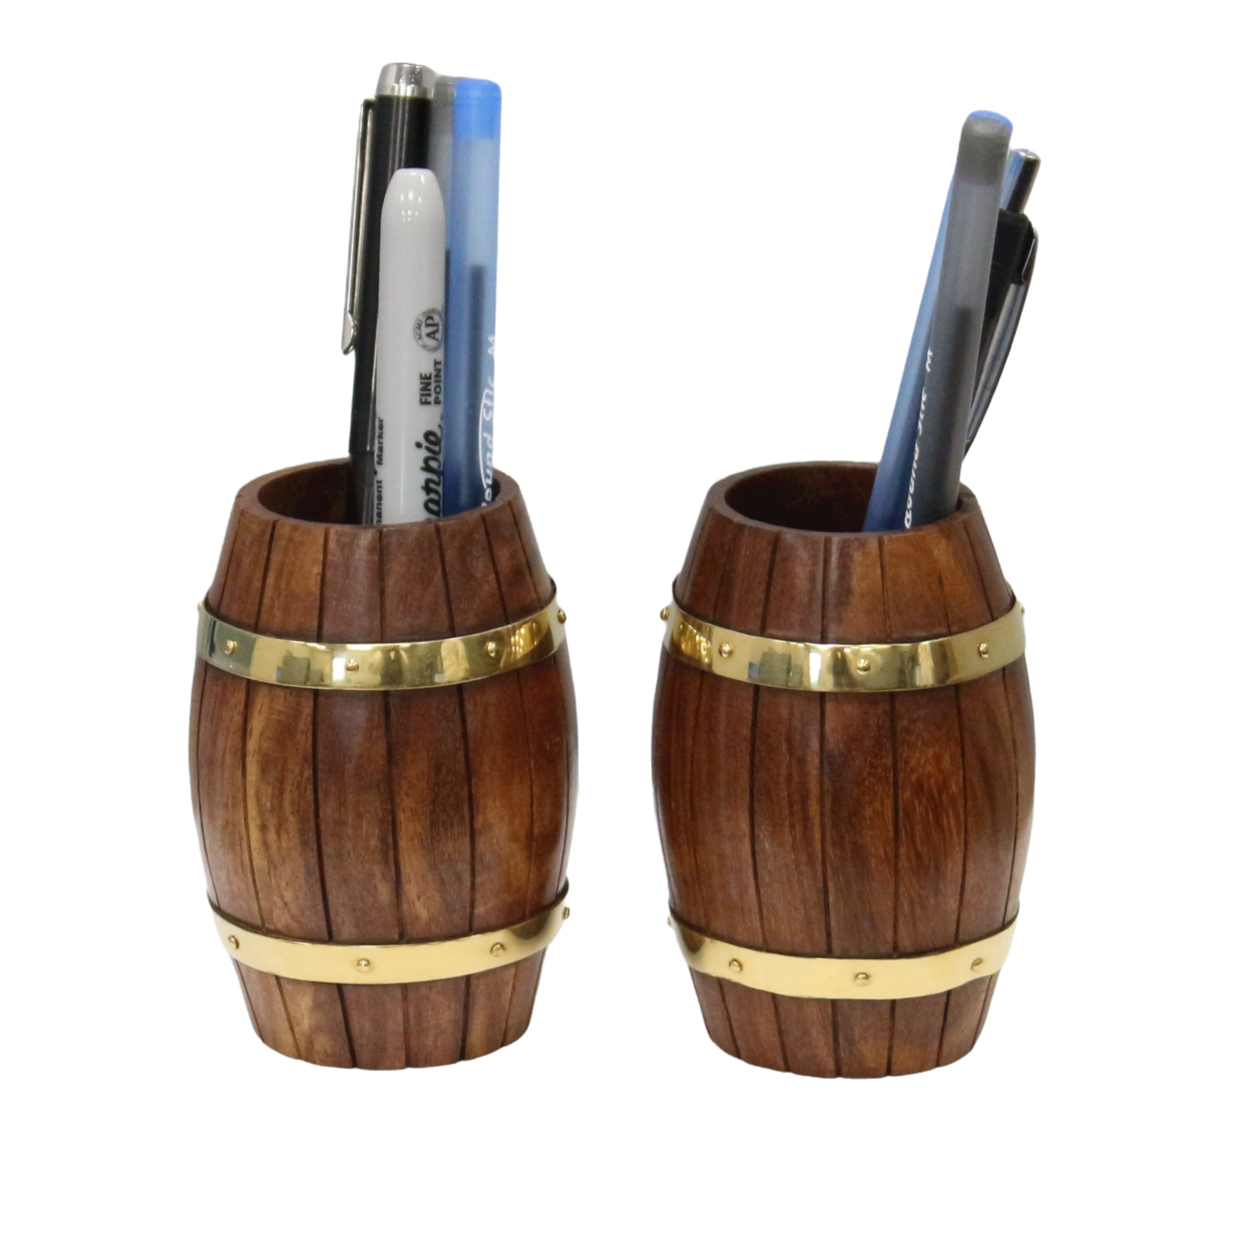 Set Of Two Decorative Wine Barrel Shaped Wooden Pen Holders For Office Desk, Or Entryway